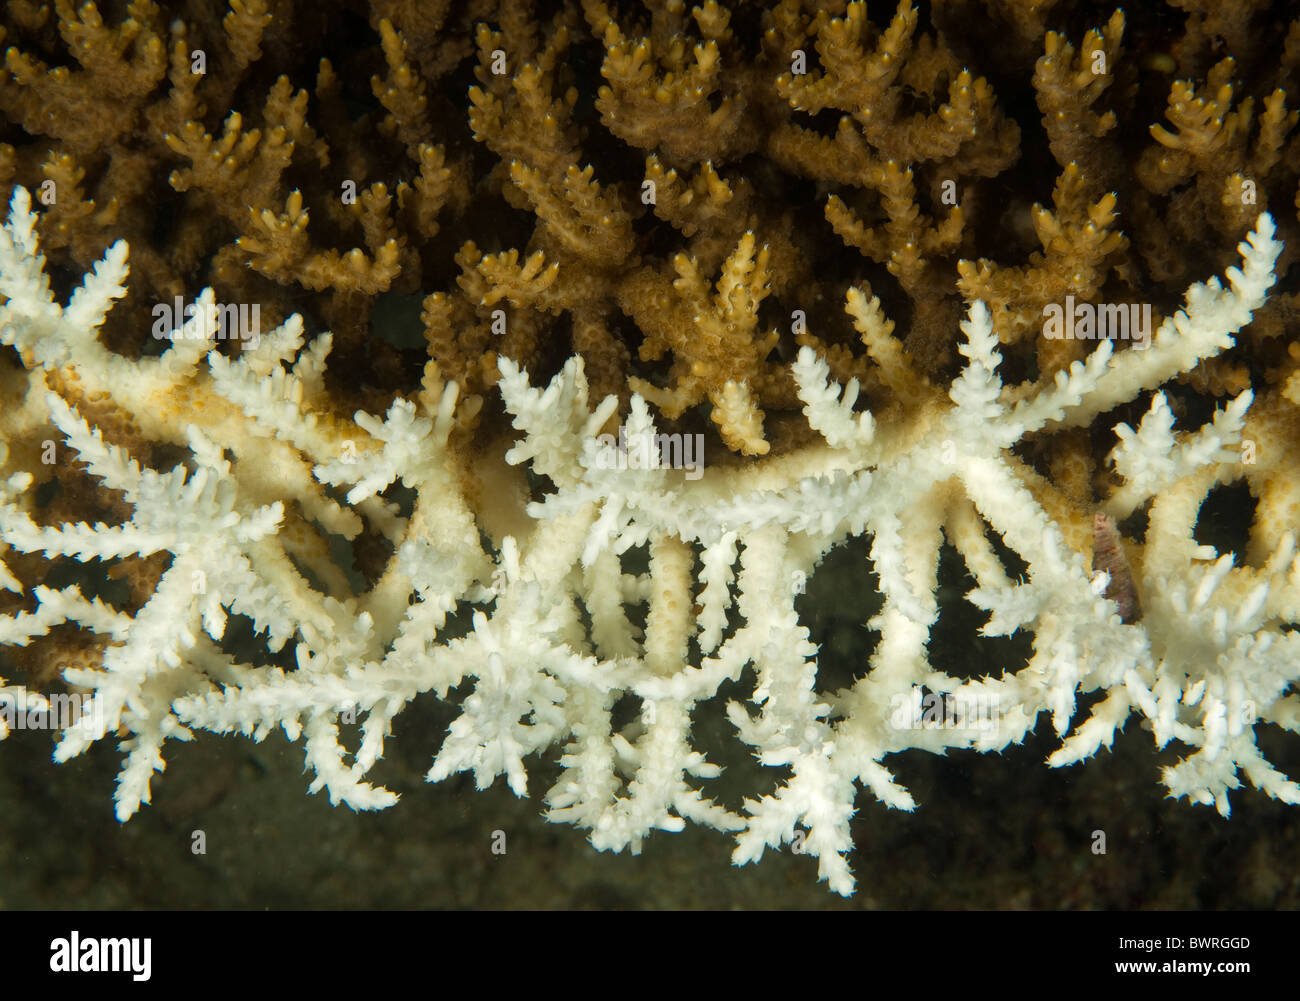 Bleaching branching hard coral due from high seawater temperature, Raja Ampat Indonesia Stock Photo